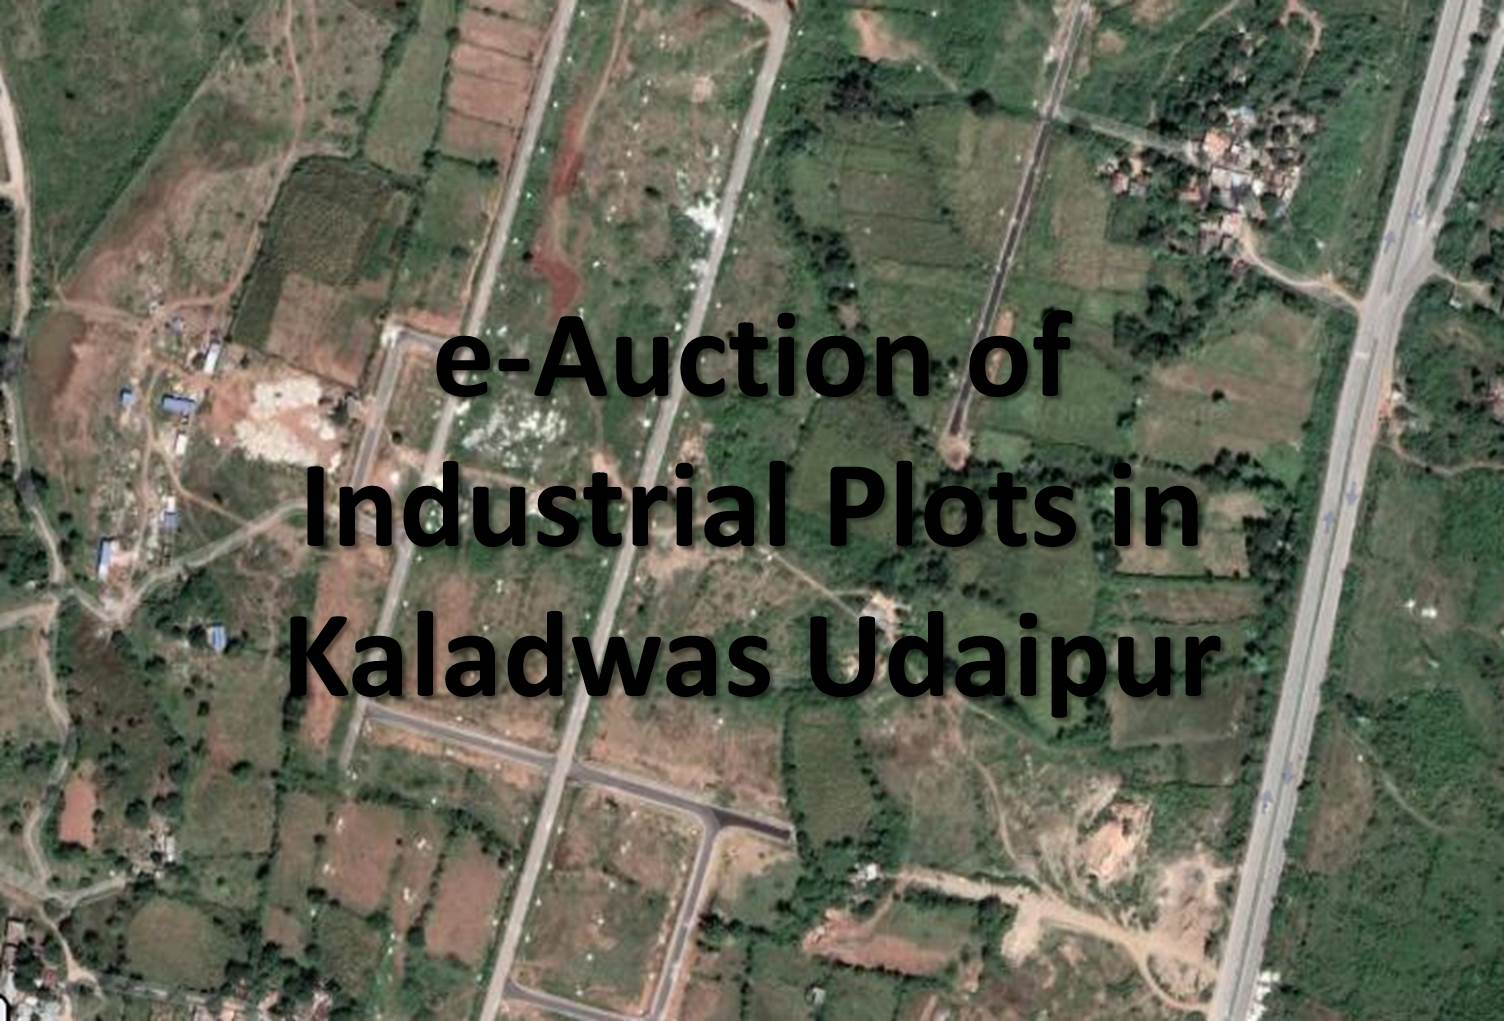 Industrial Plots in Udaipur | e-Auction at RIICO Kaladwas from 27 January